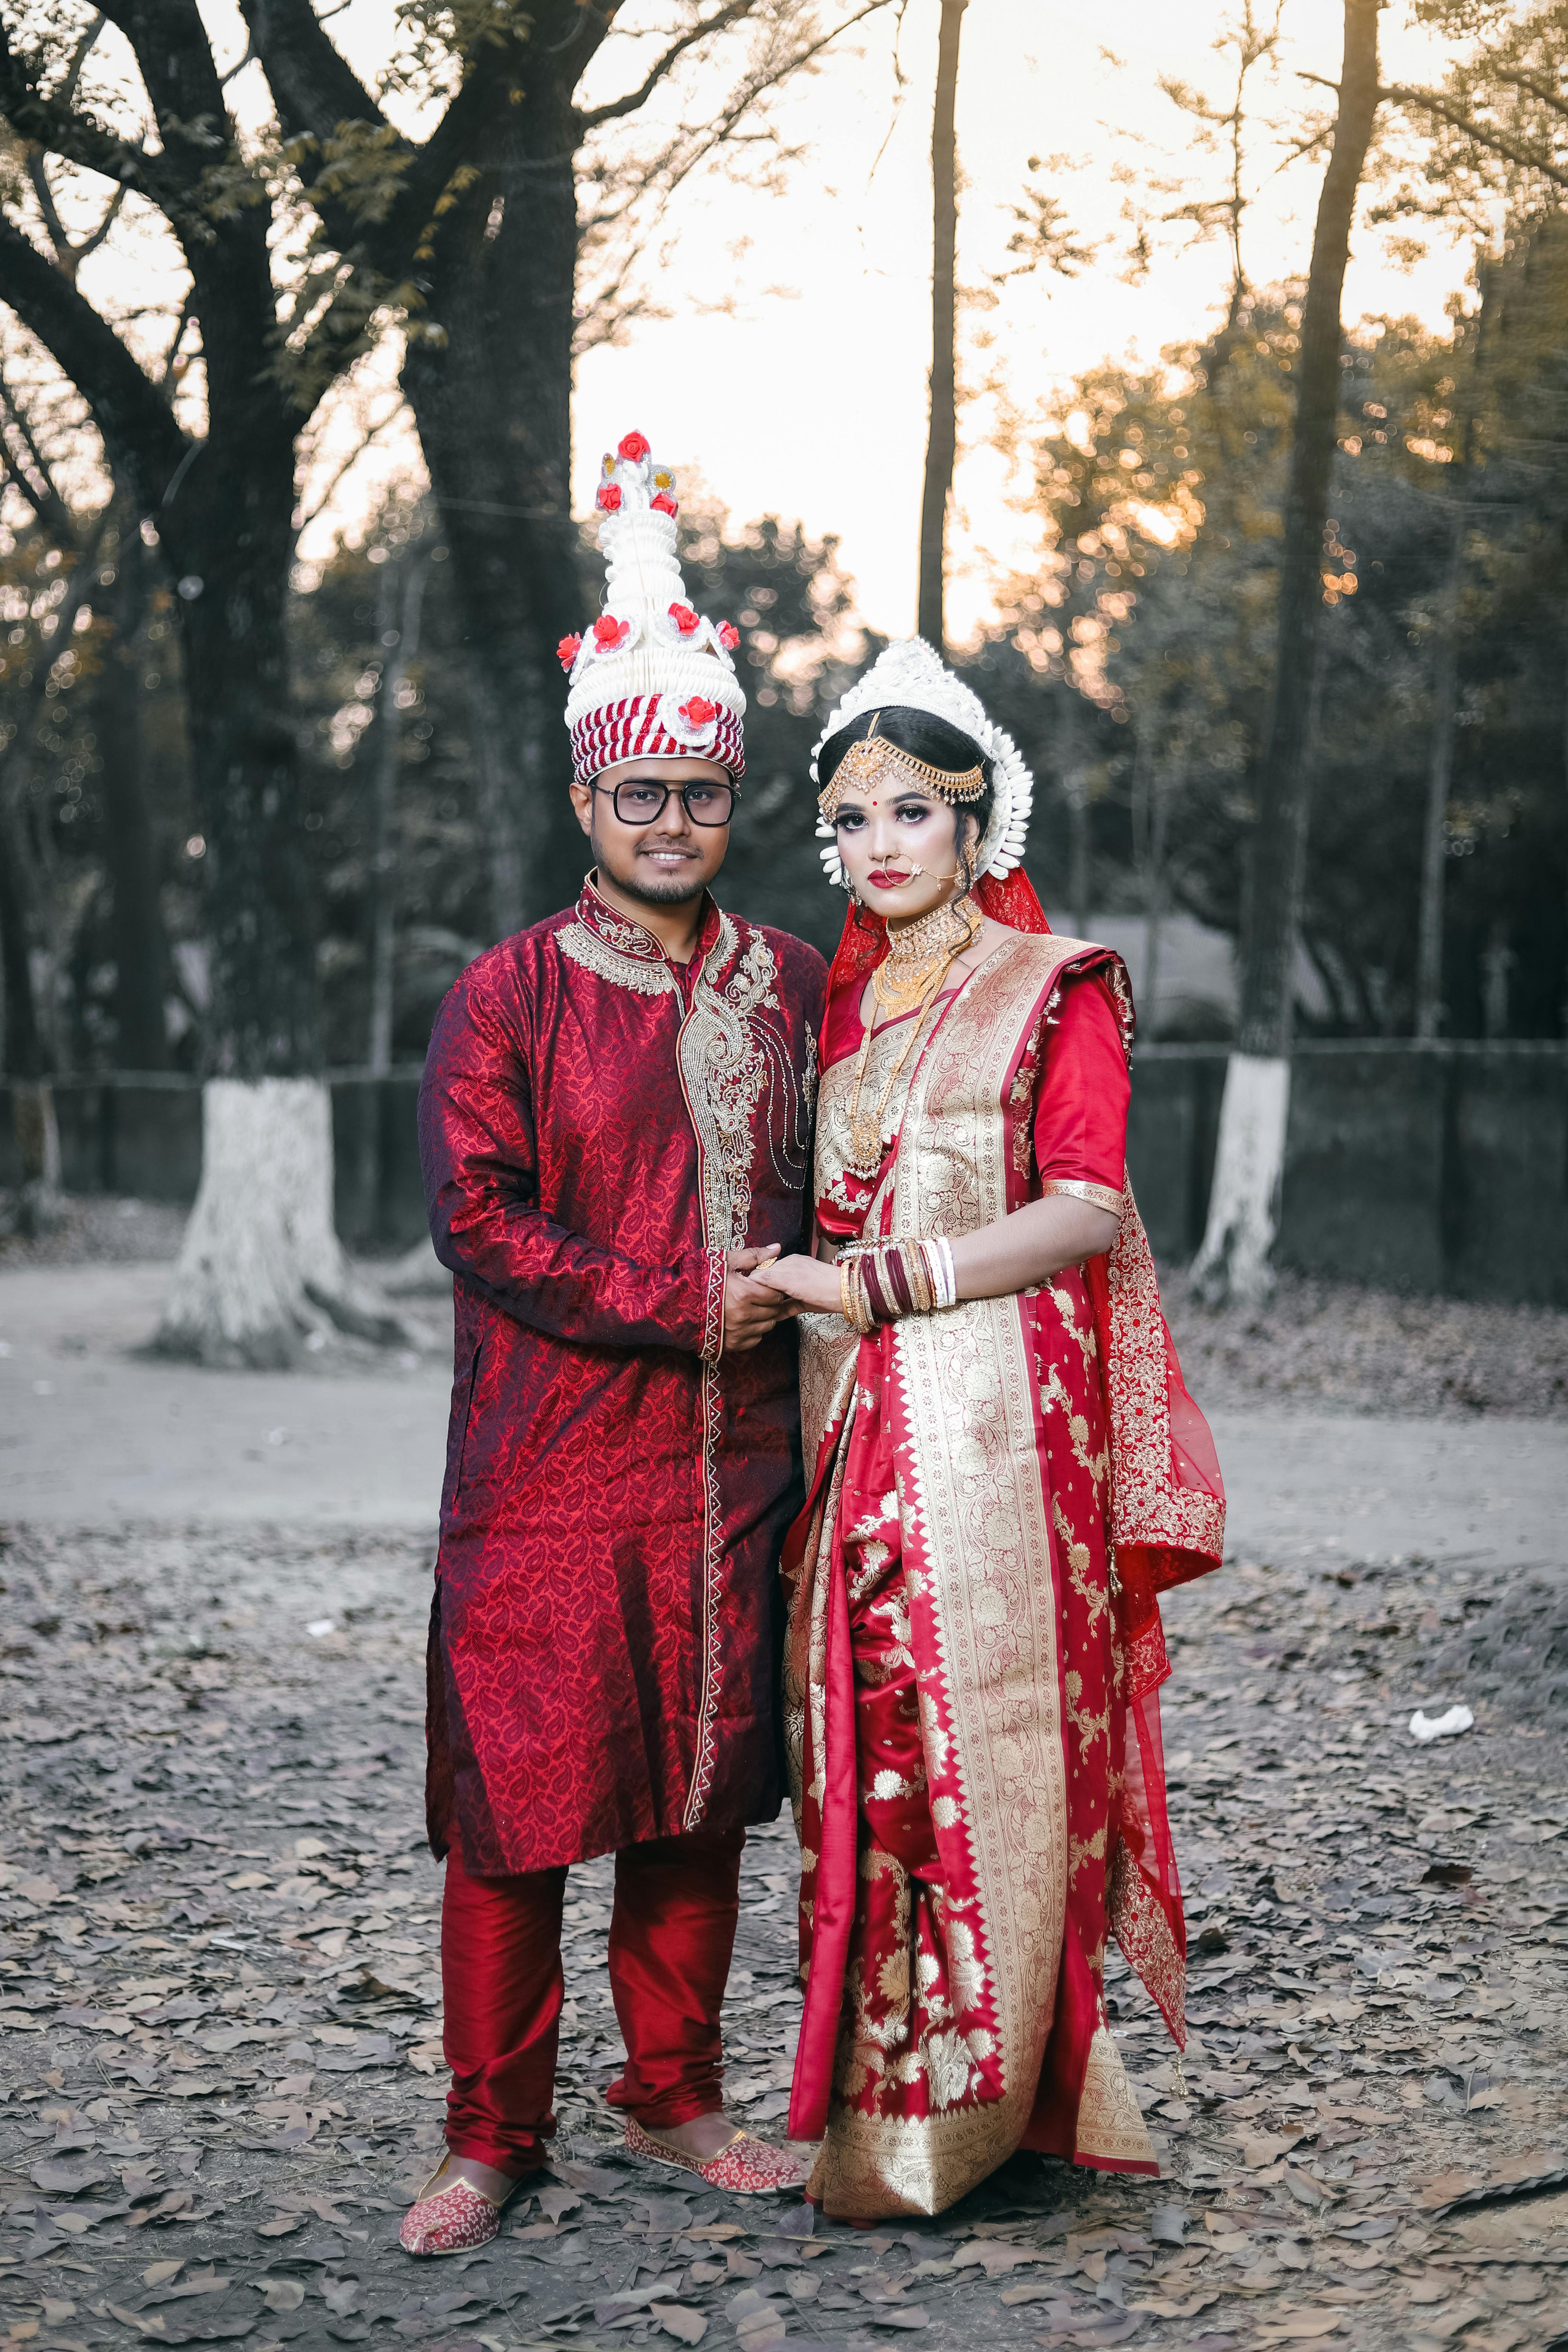 How to Blend Western Wedding Ideas in Traditional Indian Wedding  Celebrations? | Wedding Planning and Ideas | Wedding Blog